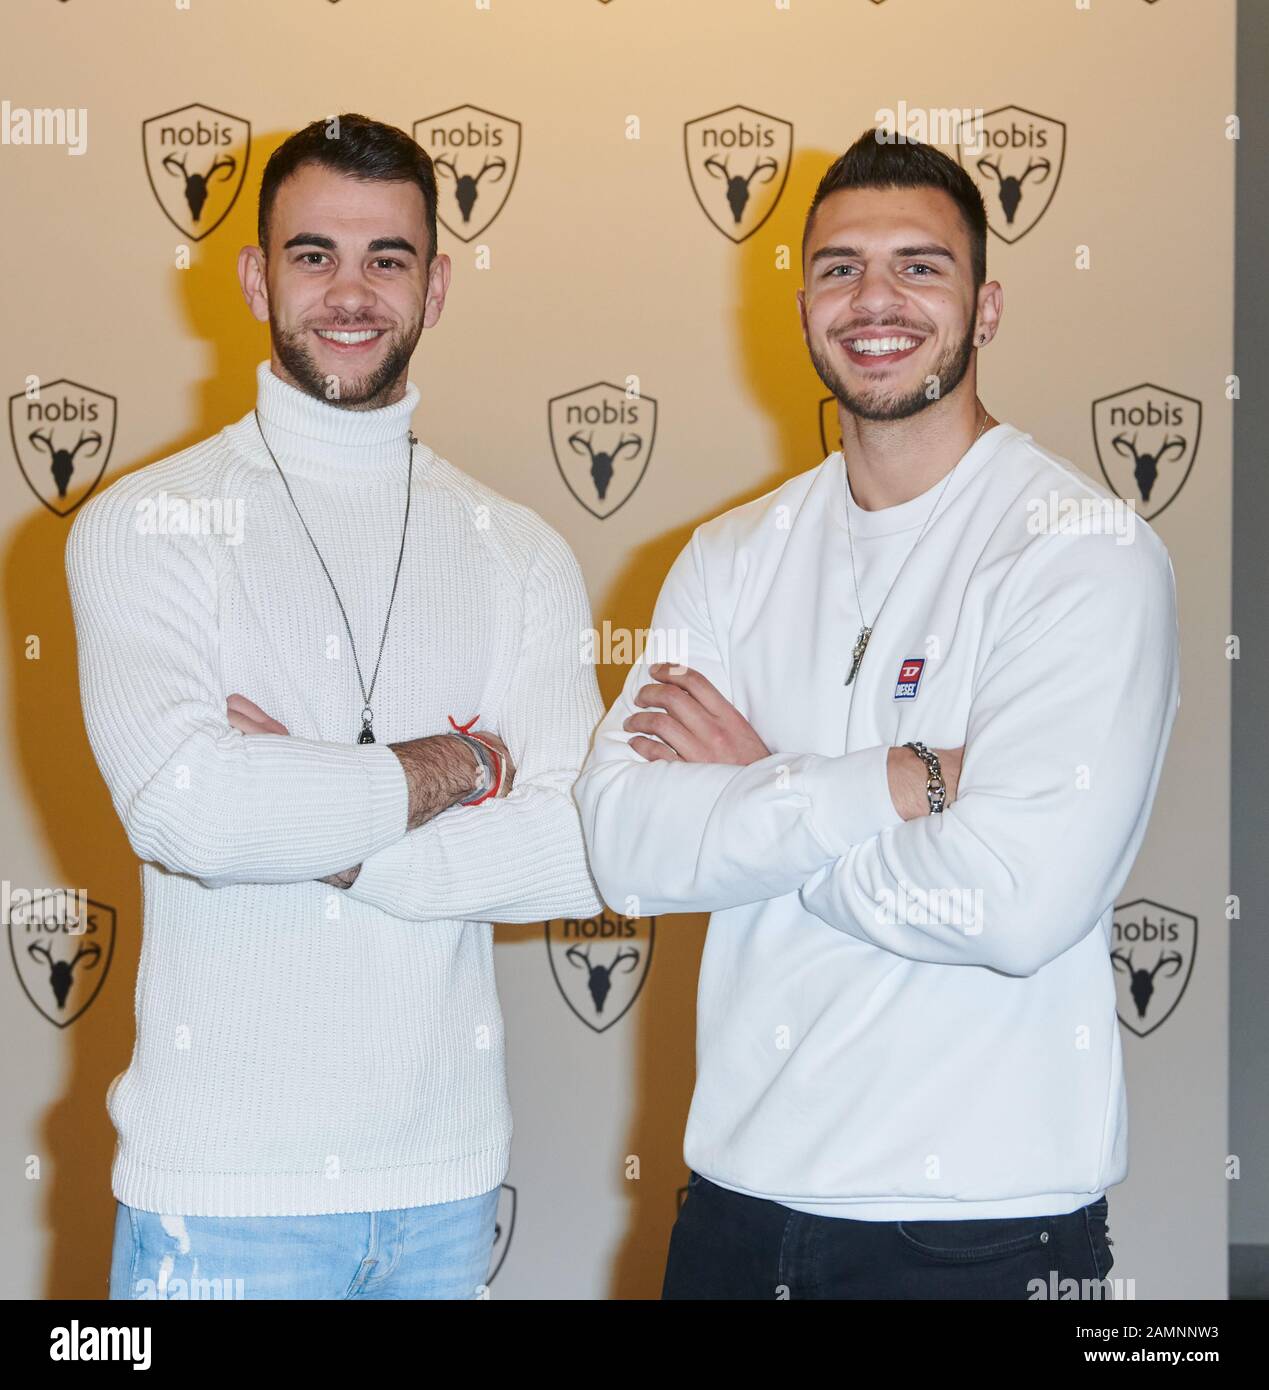 Berlin, Germany. 14th Jan, 2020. Bachelor-in-Paradise candidates Serkan Yavuz (l) and Tim Stammberger come to the Nobis show at the Hotel de Rome. Credit: Annette Riedl/dpa/Alamy Live News Stock Photo